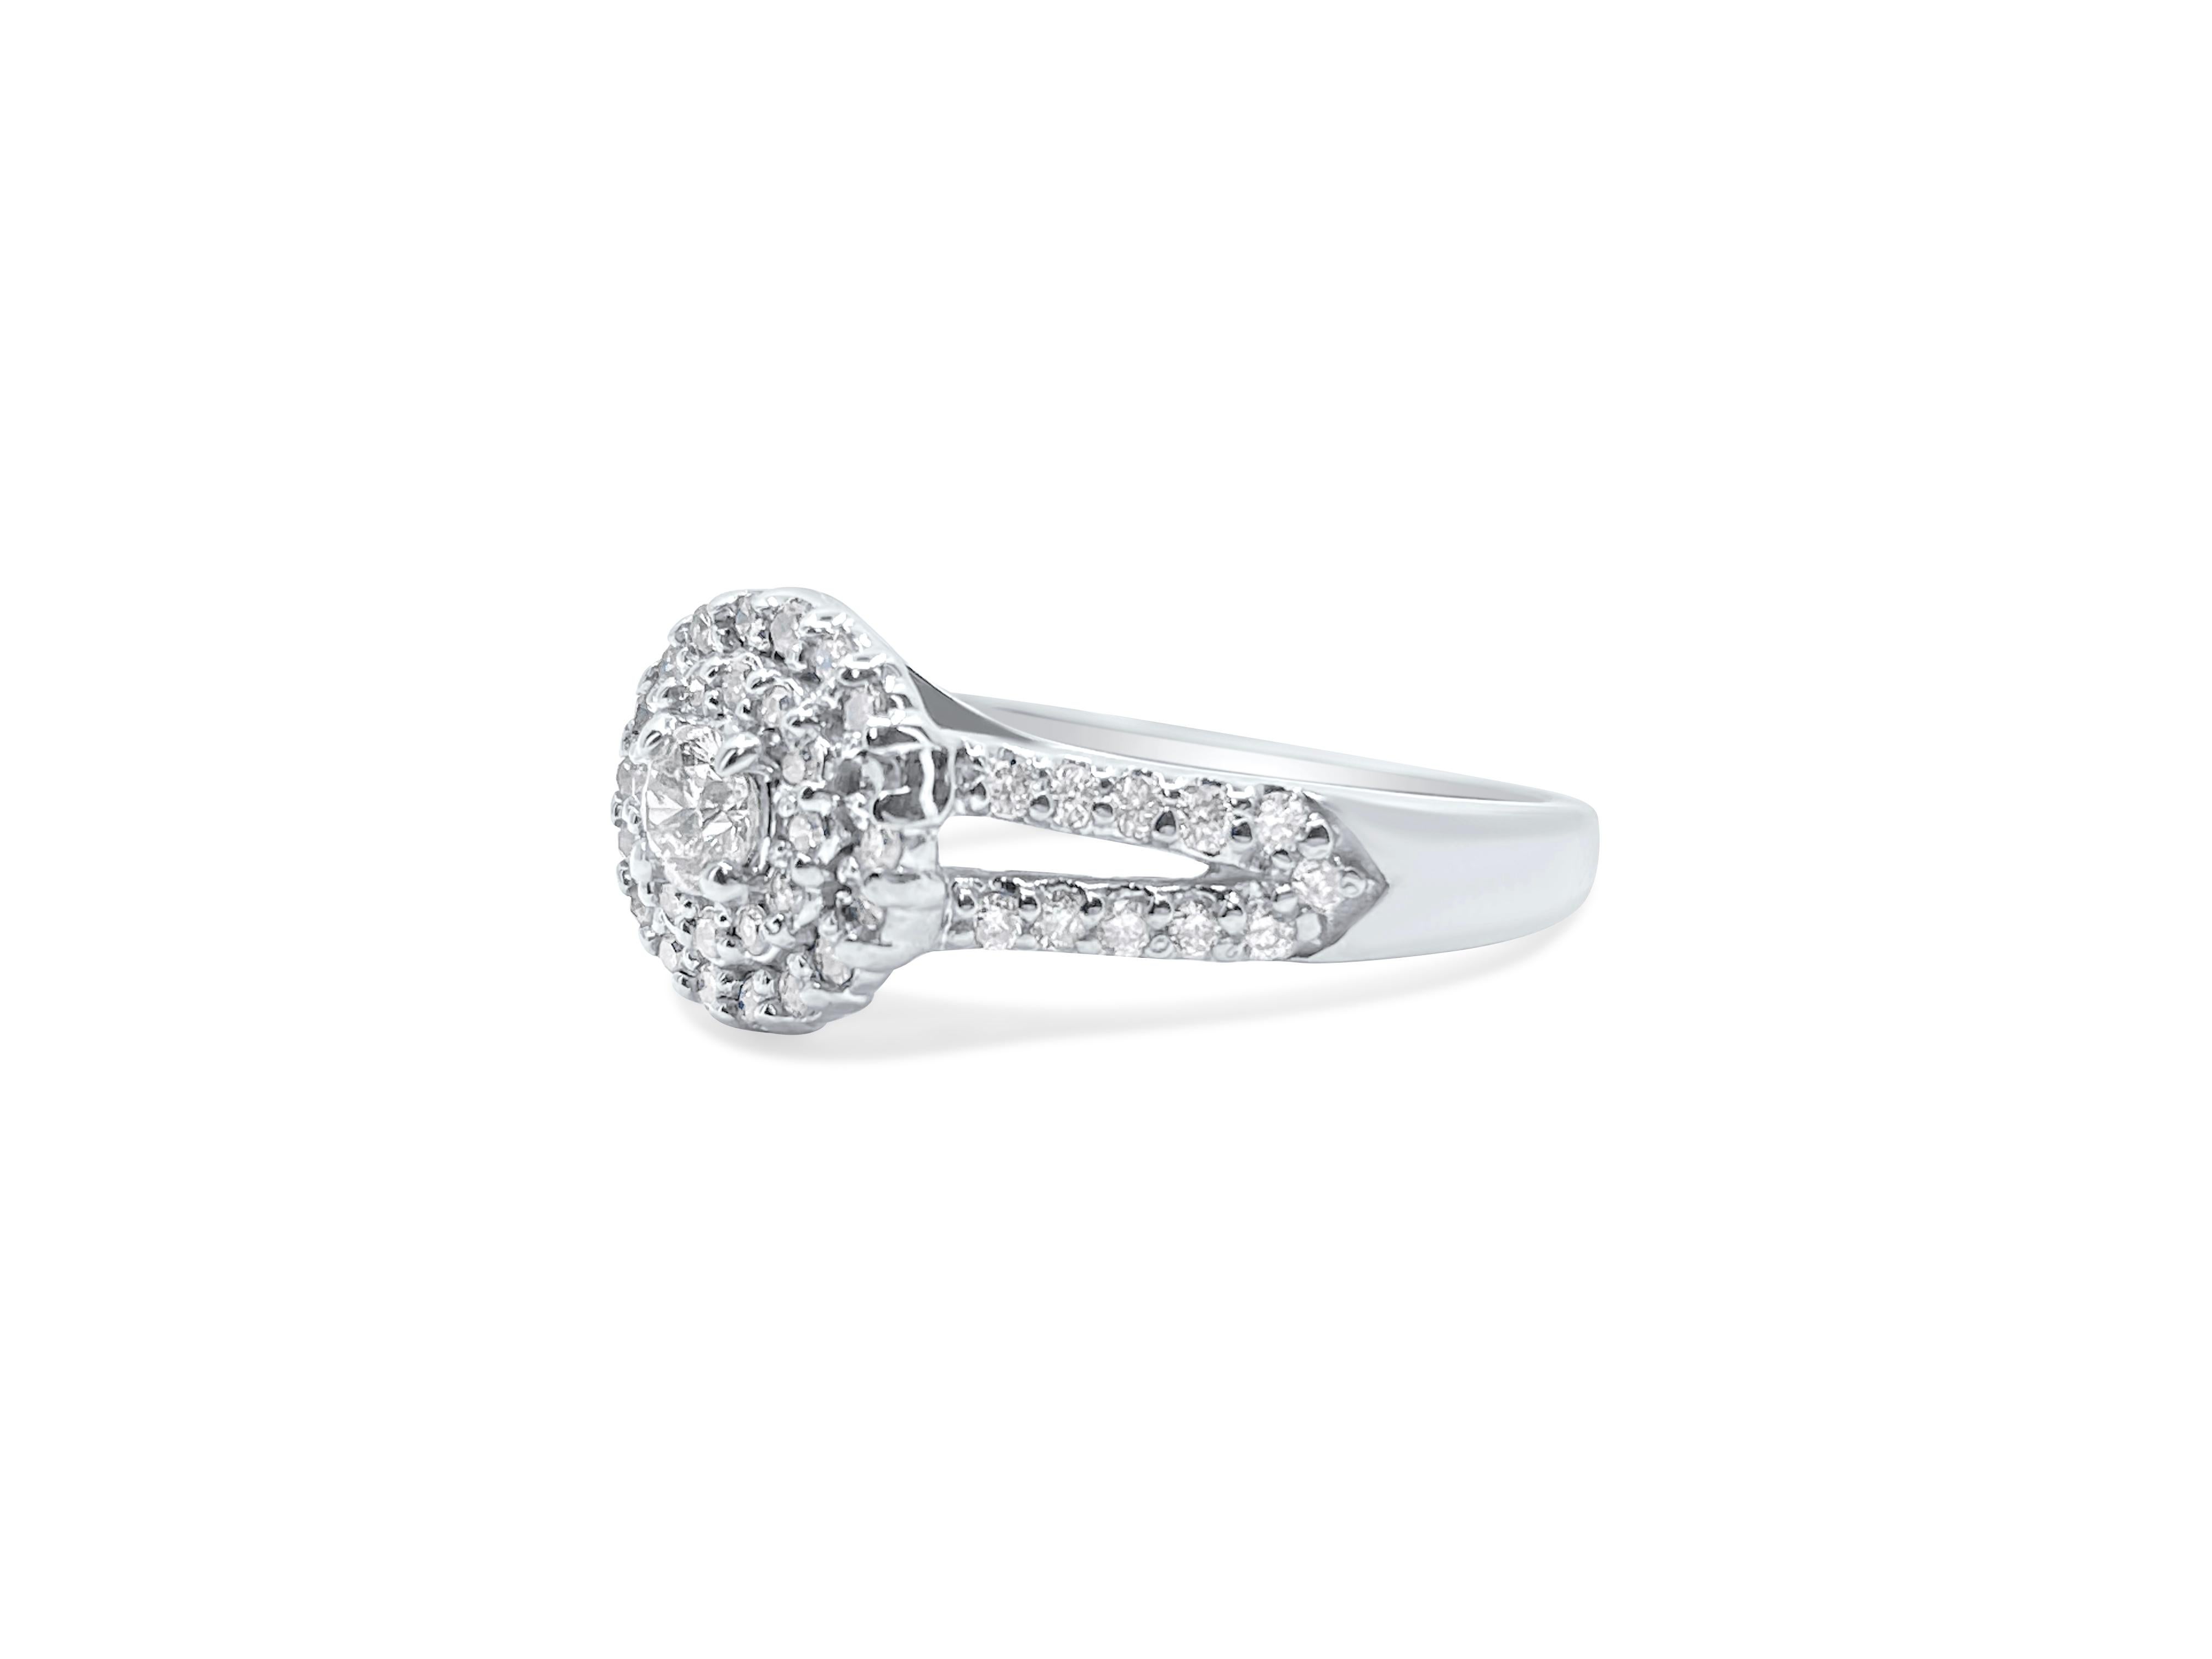 Art Deco 1.12 Carat Diamond Engagement Ring for her For Sale